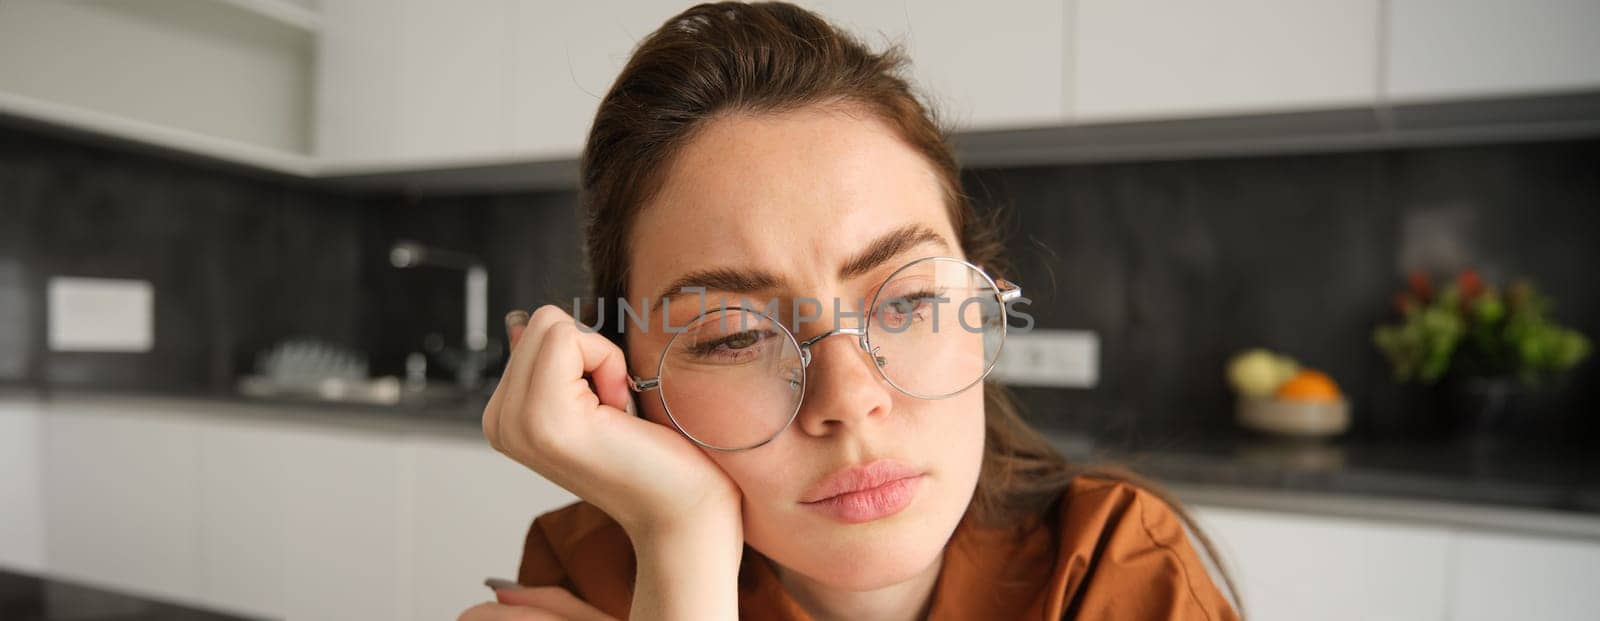 Close up portrait of woman in glasses with concerned, sad face, looking upset, troubled expression, sitting at home.